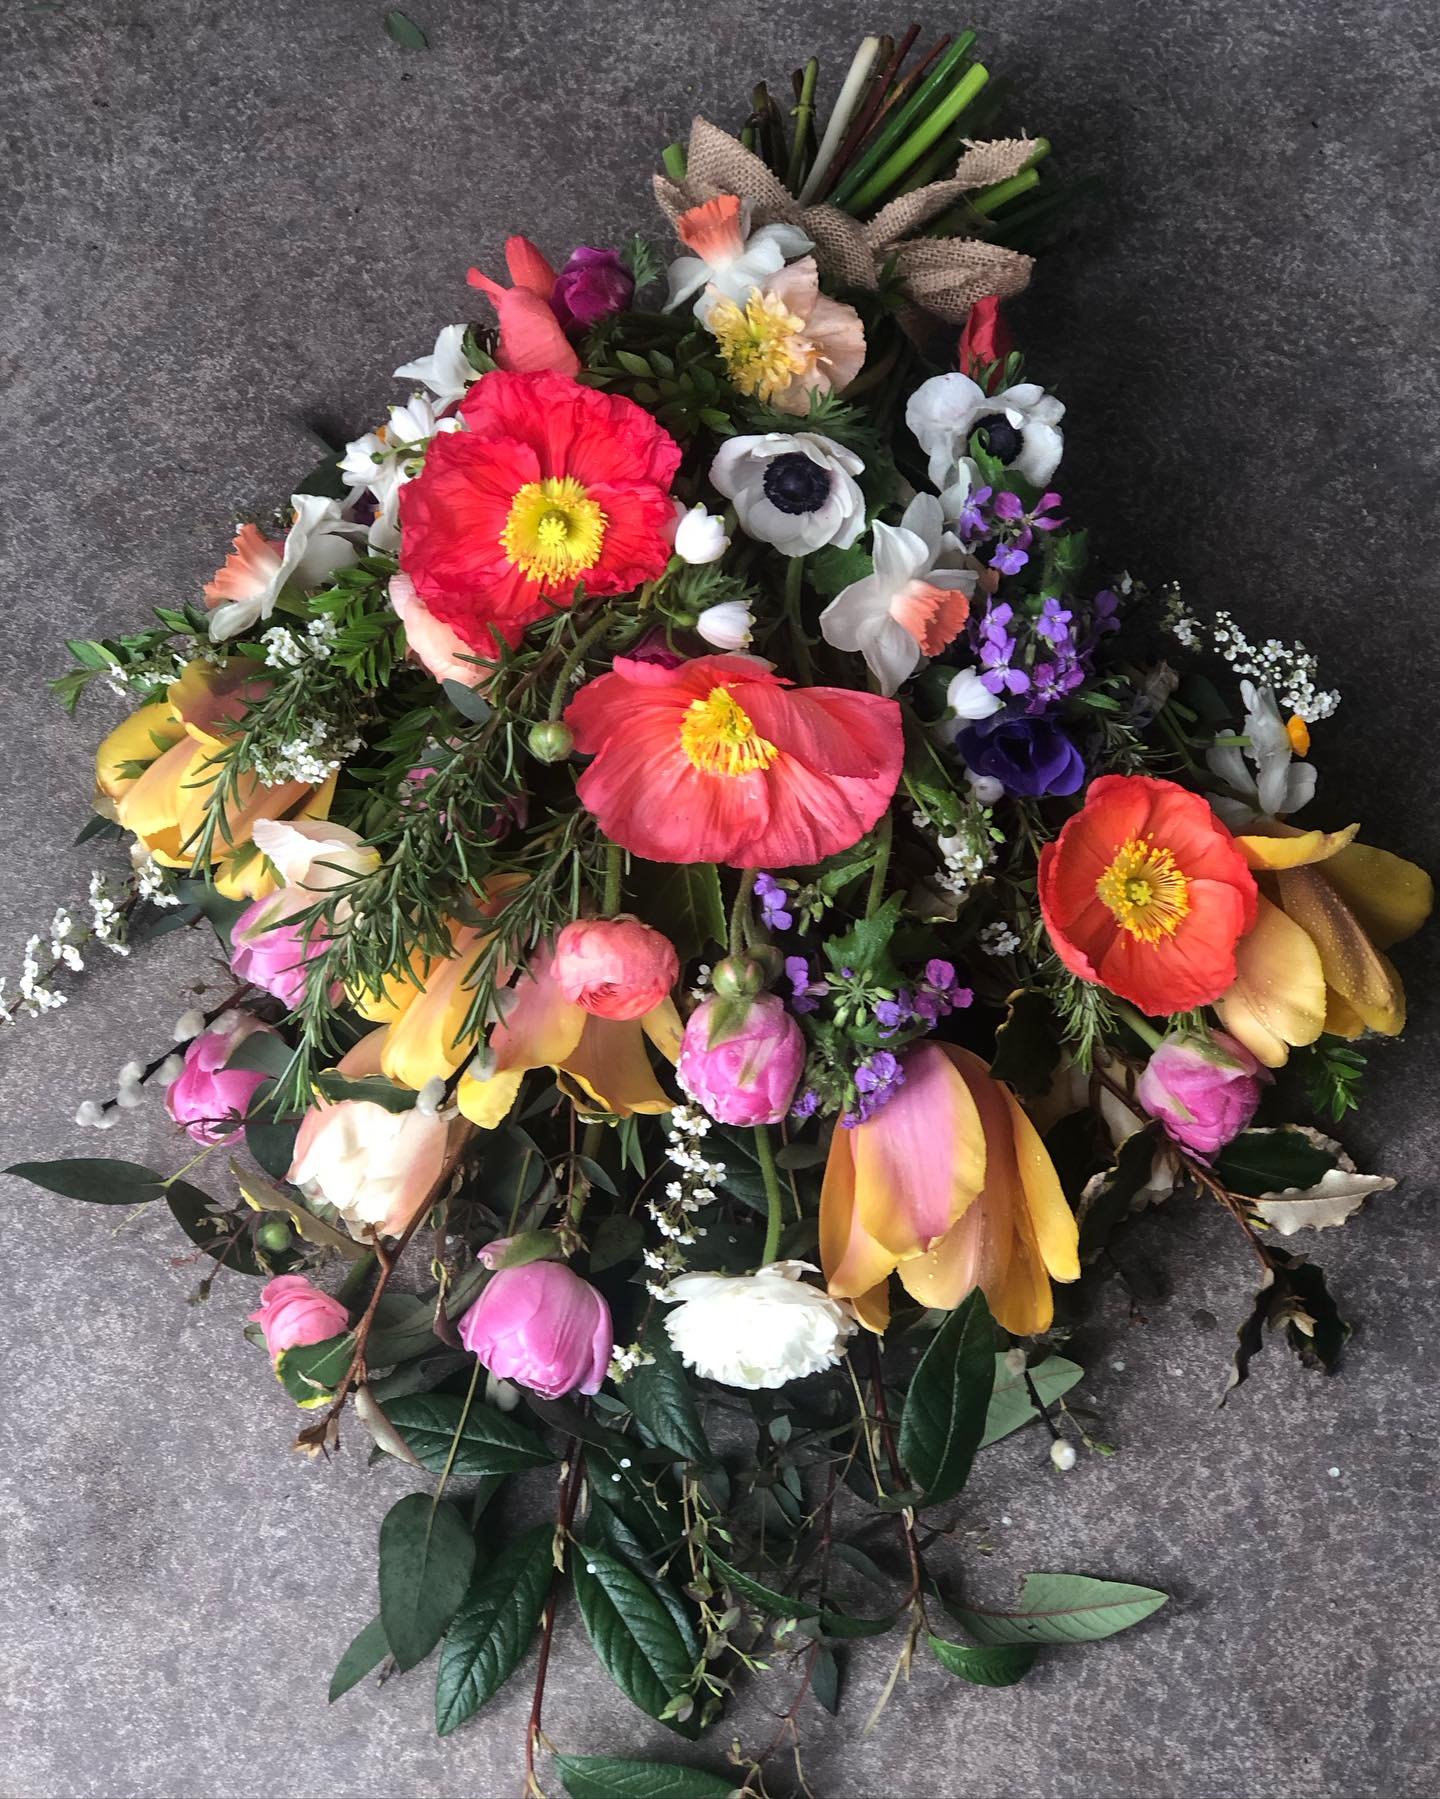 Farewell, funeral flowers don&rsquo;t need to be traditional and sombre, they can be bright, uplifting and full of life. Like these from last week made up solely of locally grown Sussex flowers, for a lady who loved wild flowers and poppies. 

In a w